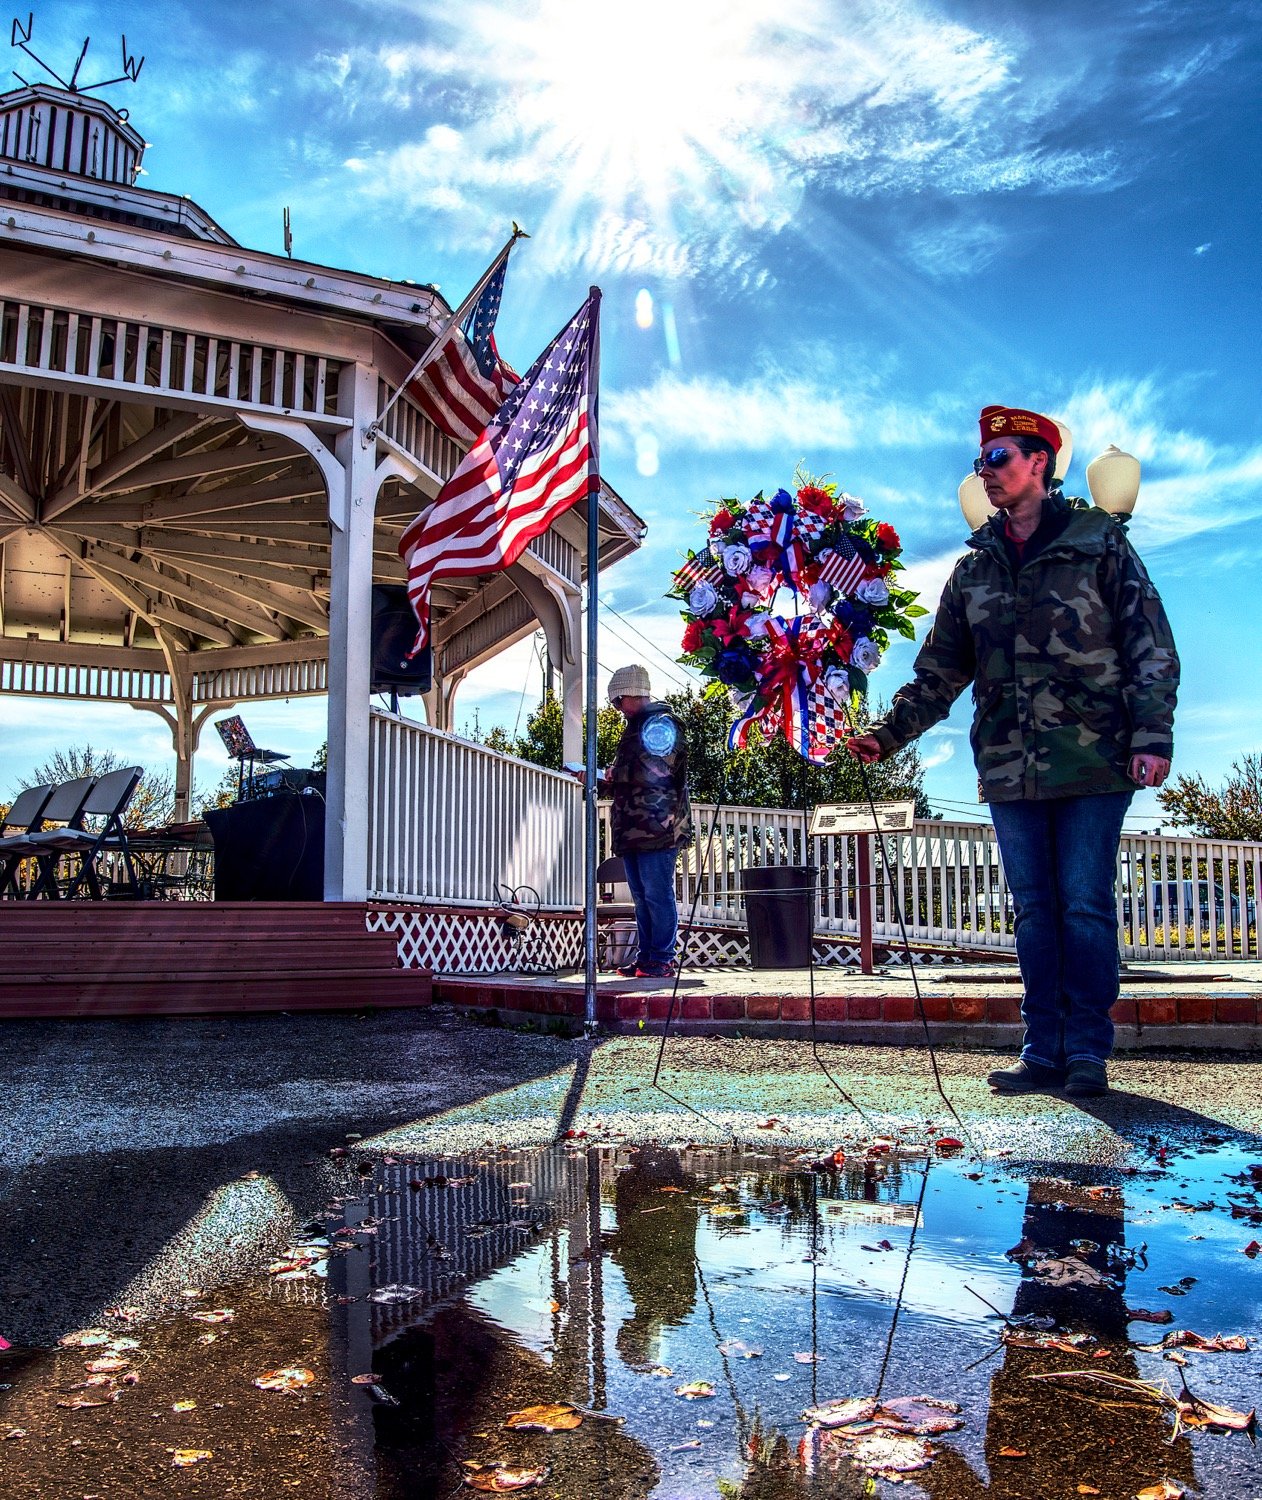 With the wind occasionally whipping up, marine veteran Jenni Biesheuvel makes sure the memorial wreath has no chance of falling over. [view more vets]